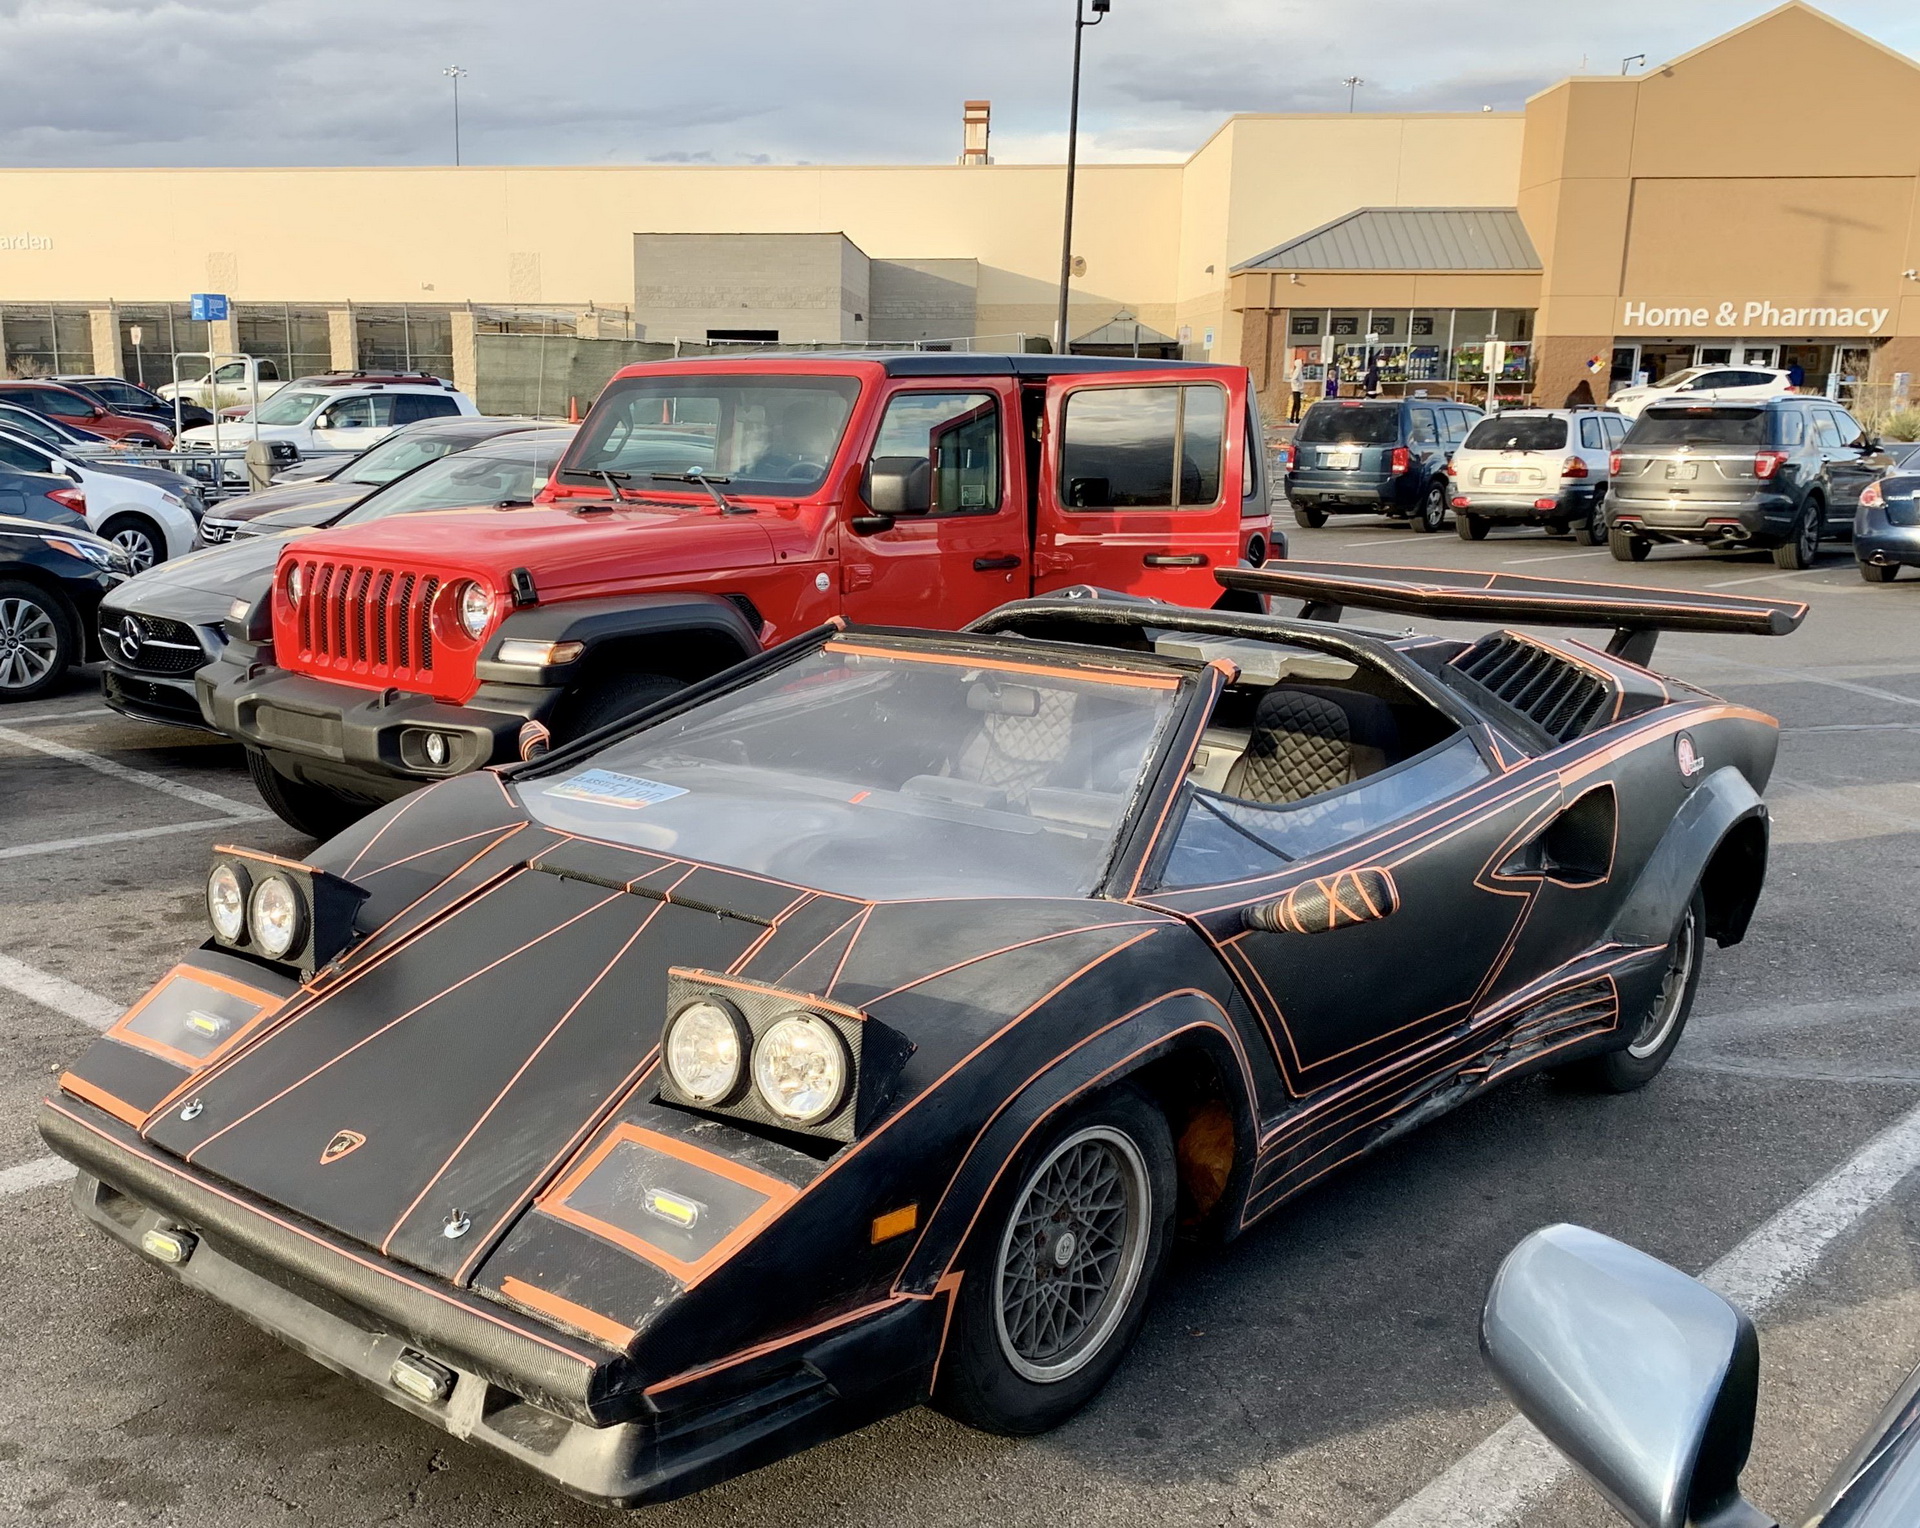 Iconic Lambo Countach Spotted In Just Kidding It S A Fiero Carscoops